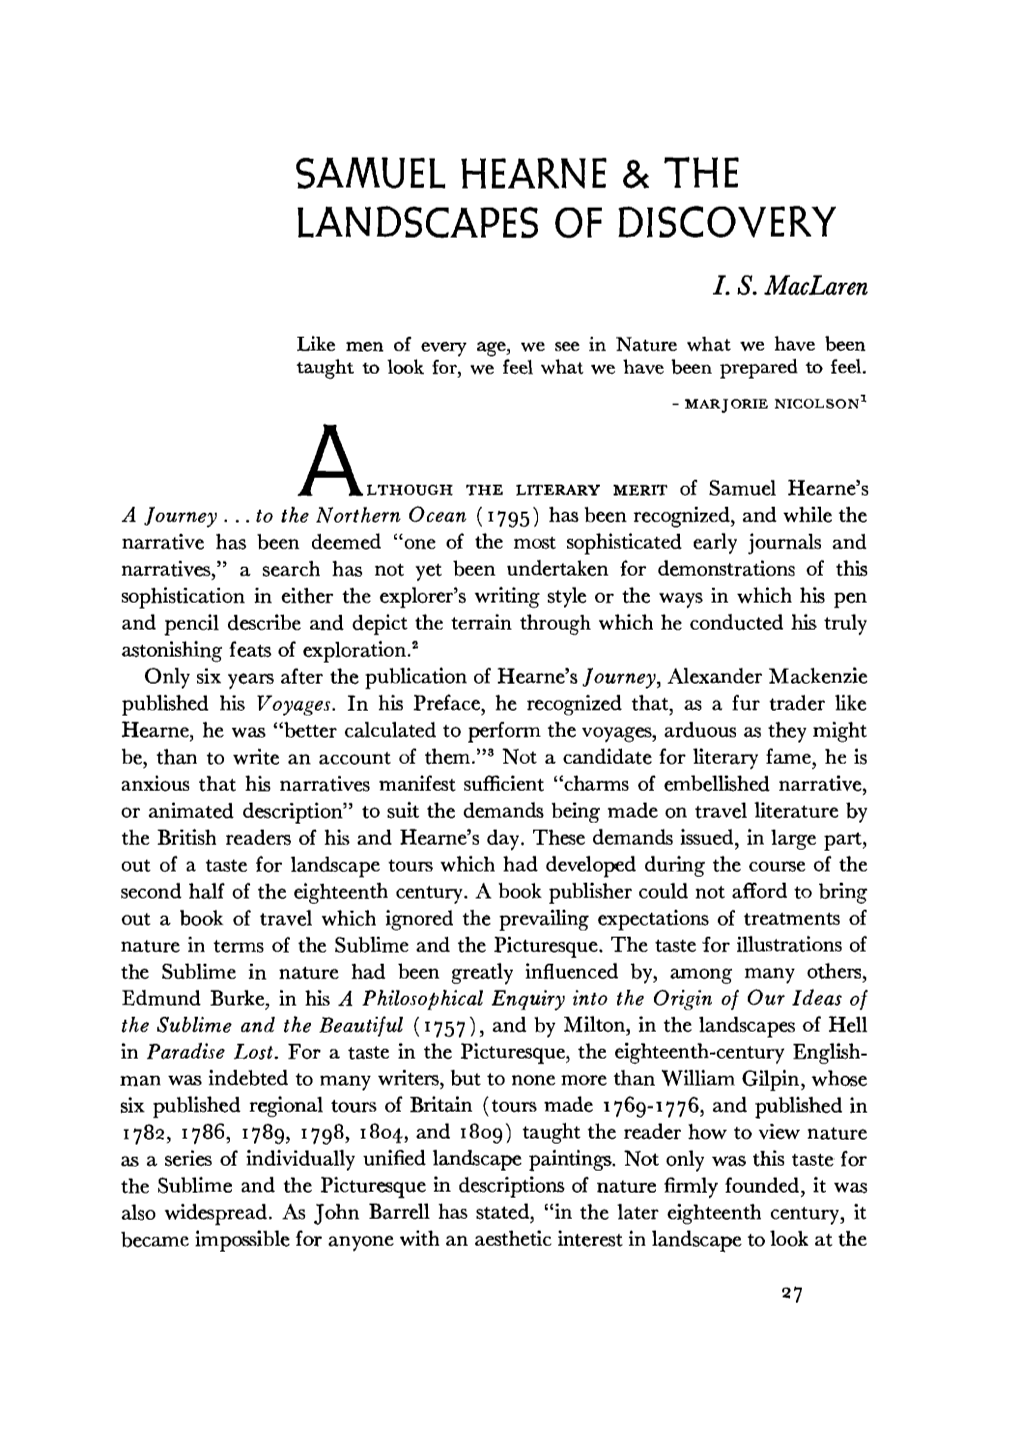 Samuel Hearne & the Landscapes of Discovery